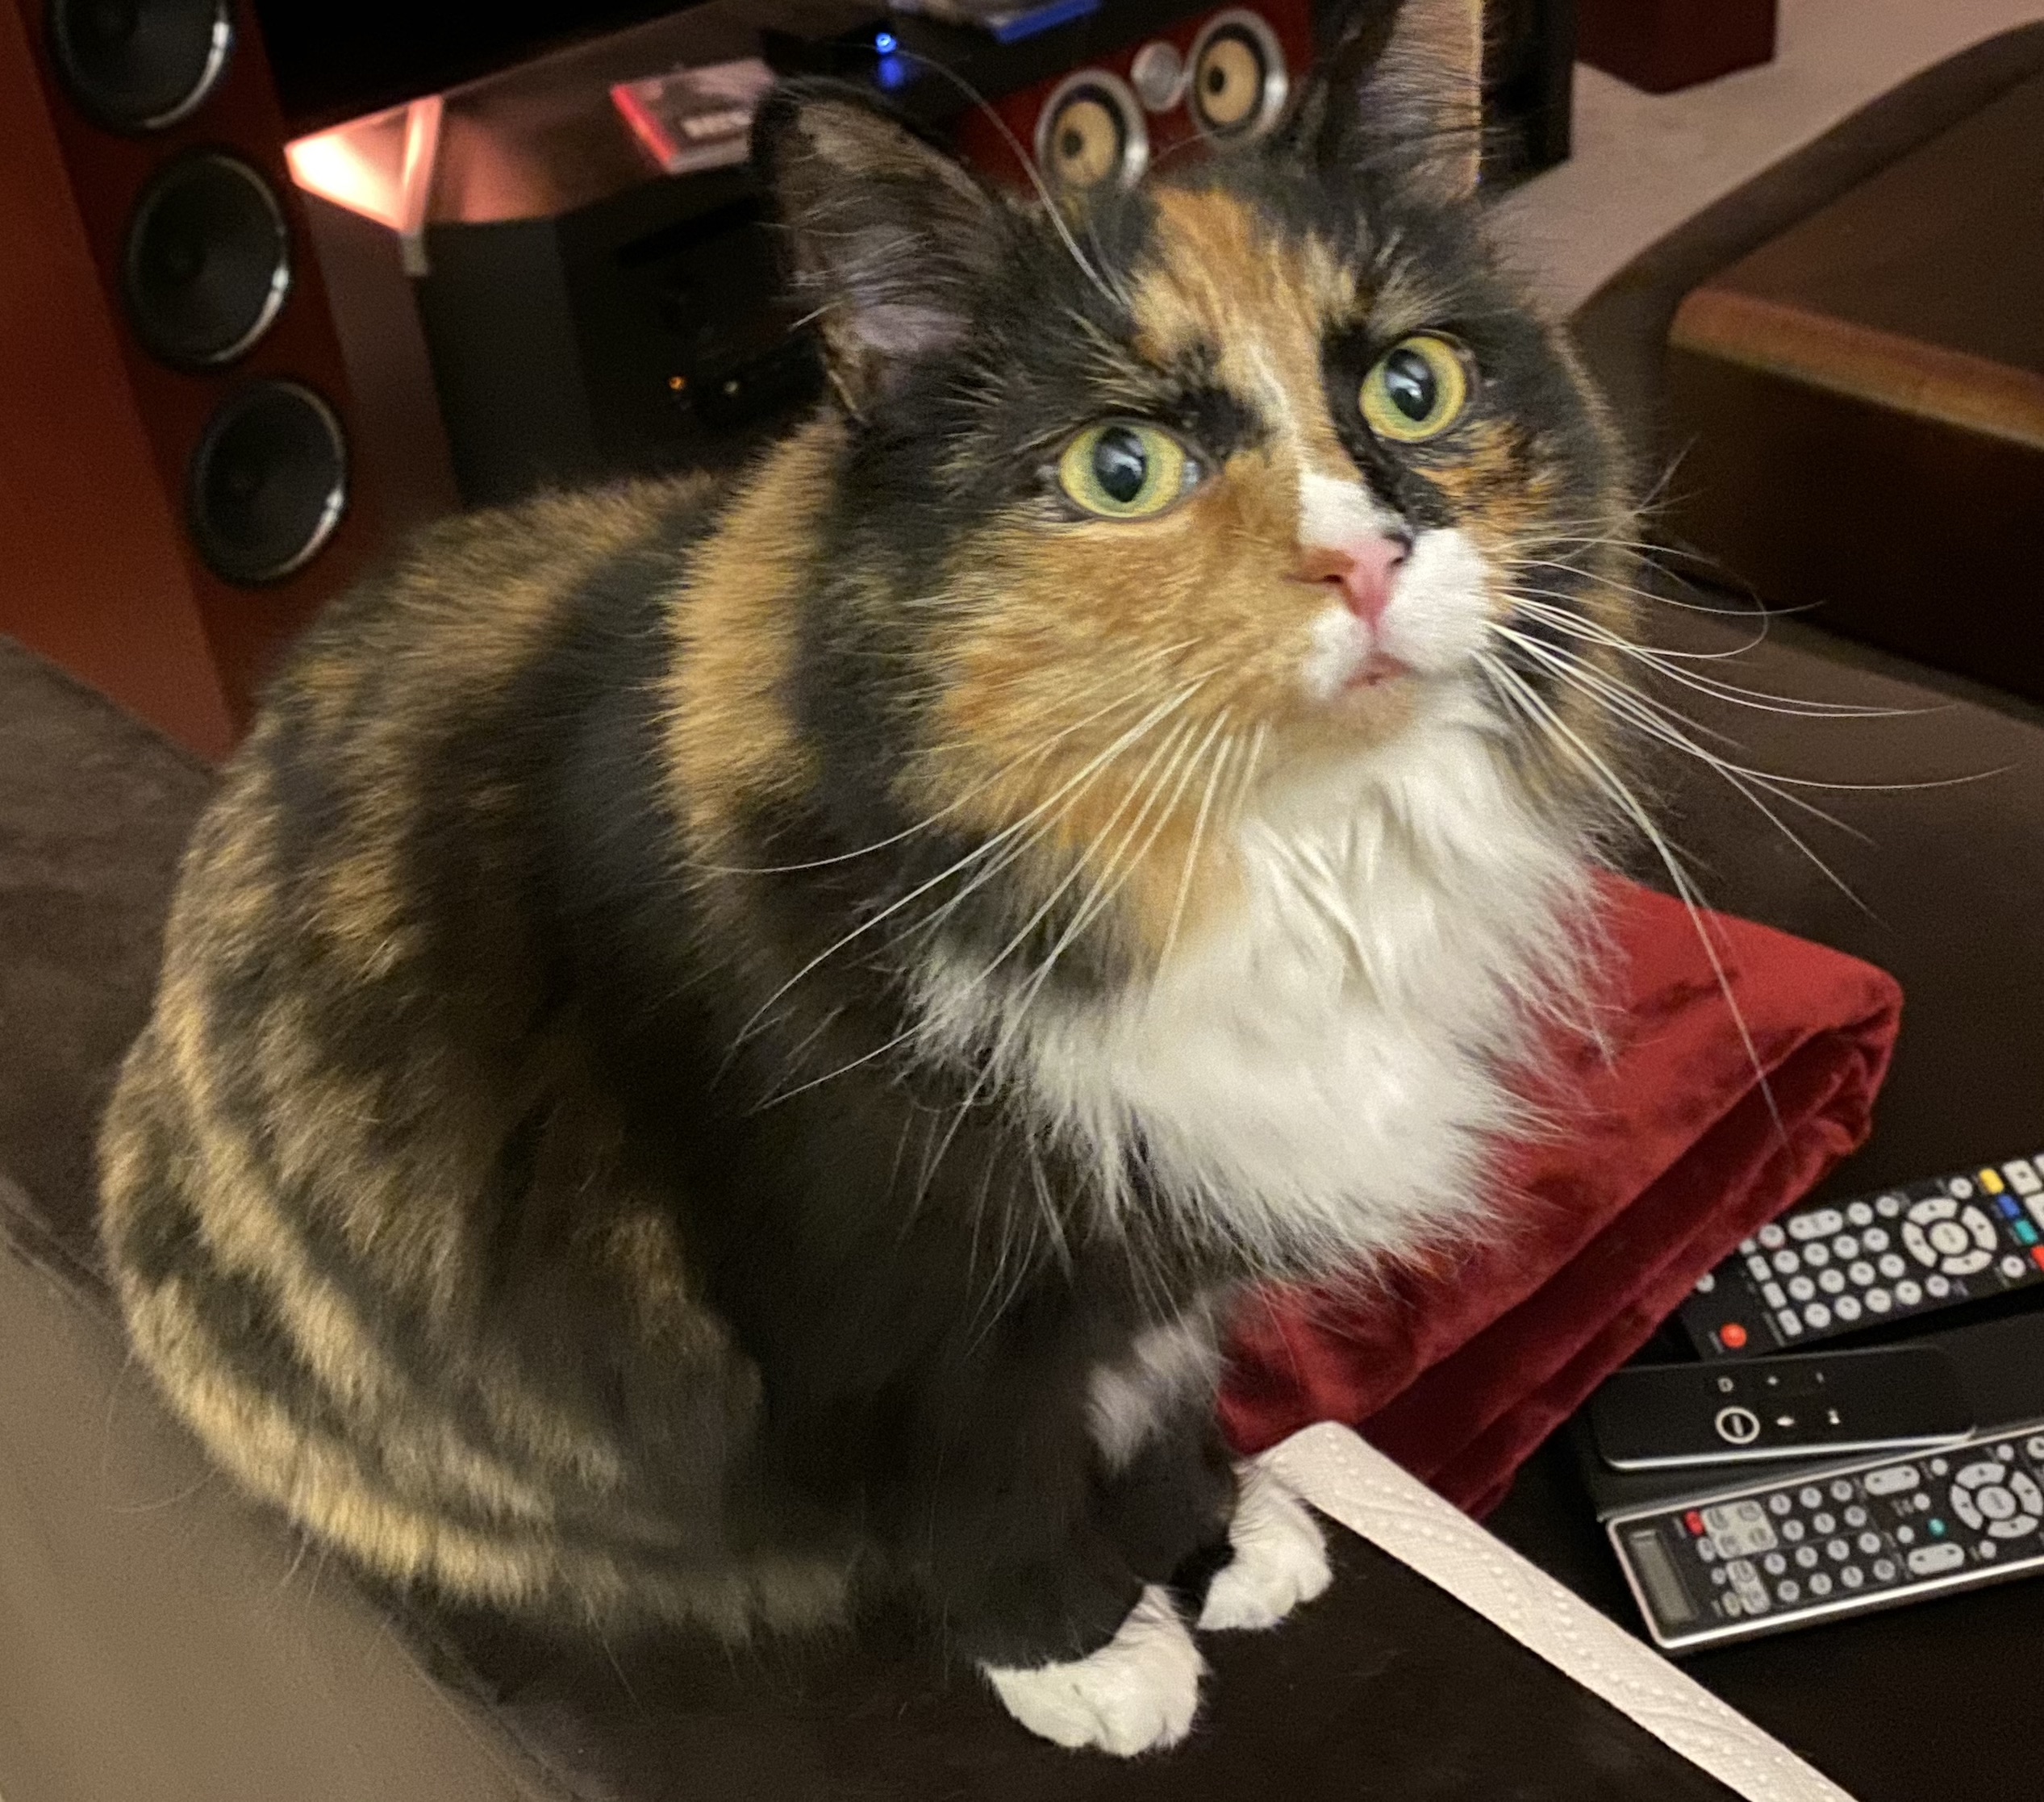 https://www.askamanager.org/wp-content/uploads/2019/11/Olive-wants-something.jpg